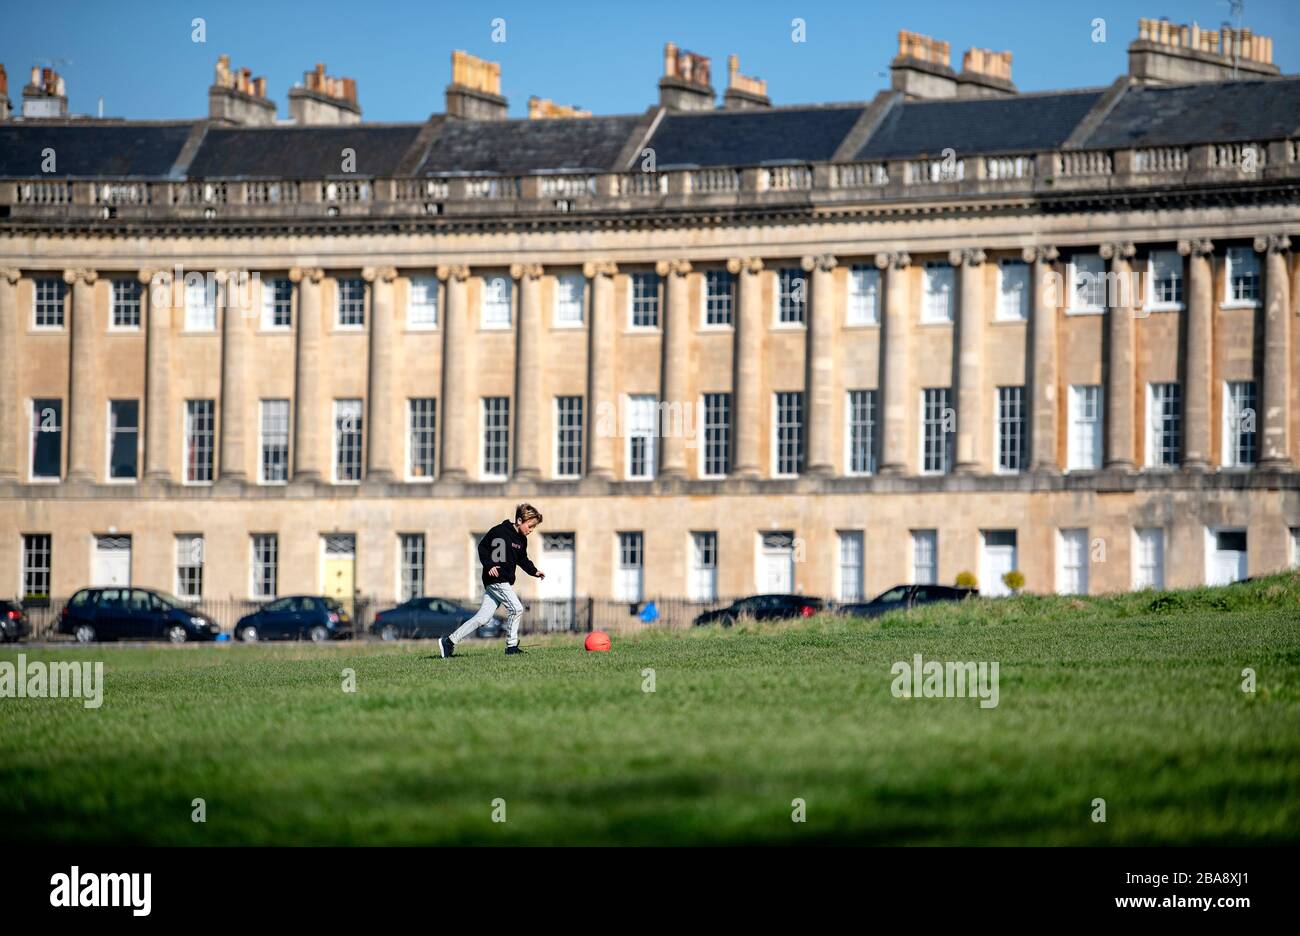 A young boy plays football in front of the Royal Crescent in Bath, after the UK government introduced strict restrictions in a bid to combat Coronavirus. Stock Photo